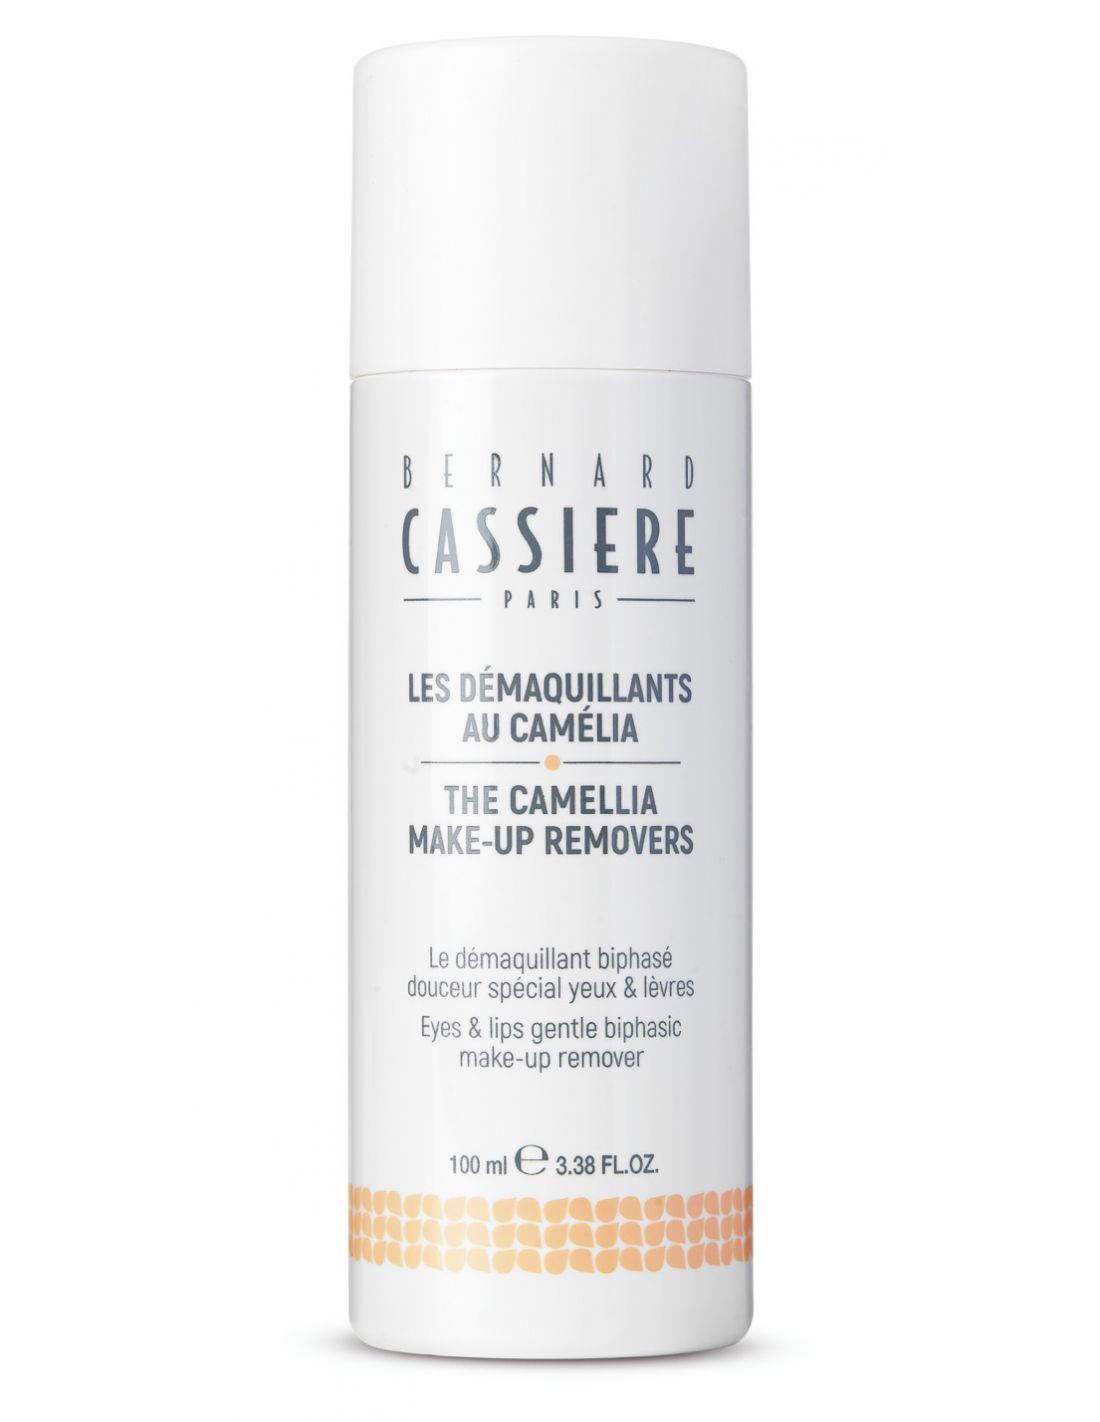 BERNARD CASSIERE THE CAMELLIA EYES AND LIPS GENTLE BIPHASIC MAKE-UP REMOVER